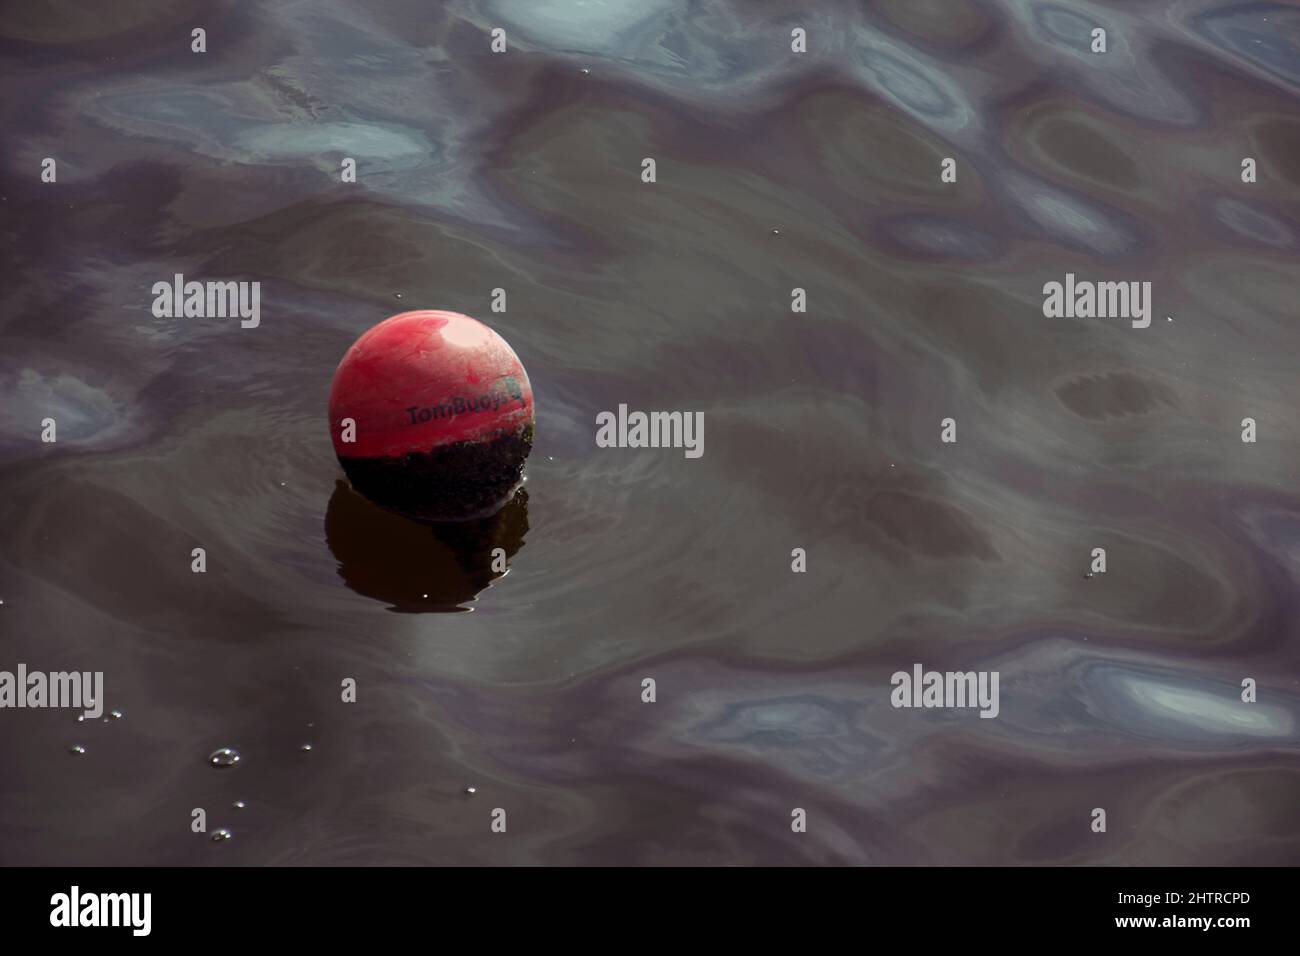 London, UK - September 17th 2021: a round red buoy drifting on the water Stock Photo